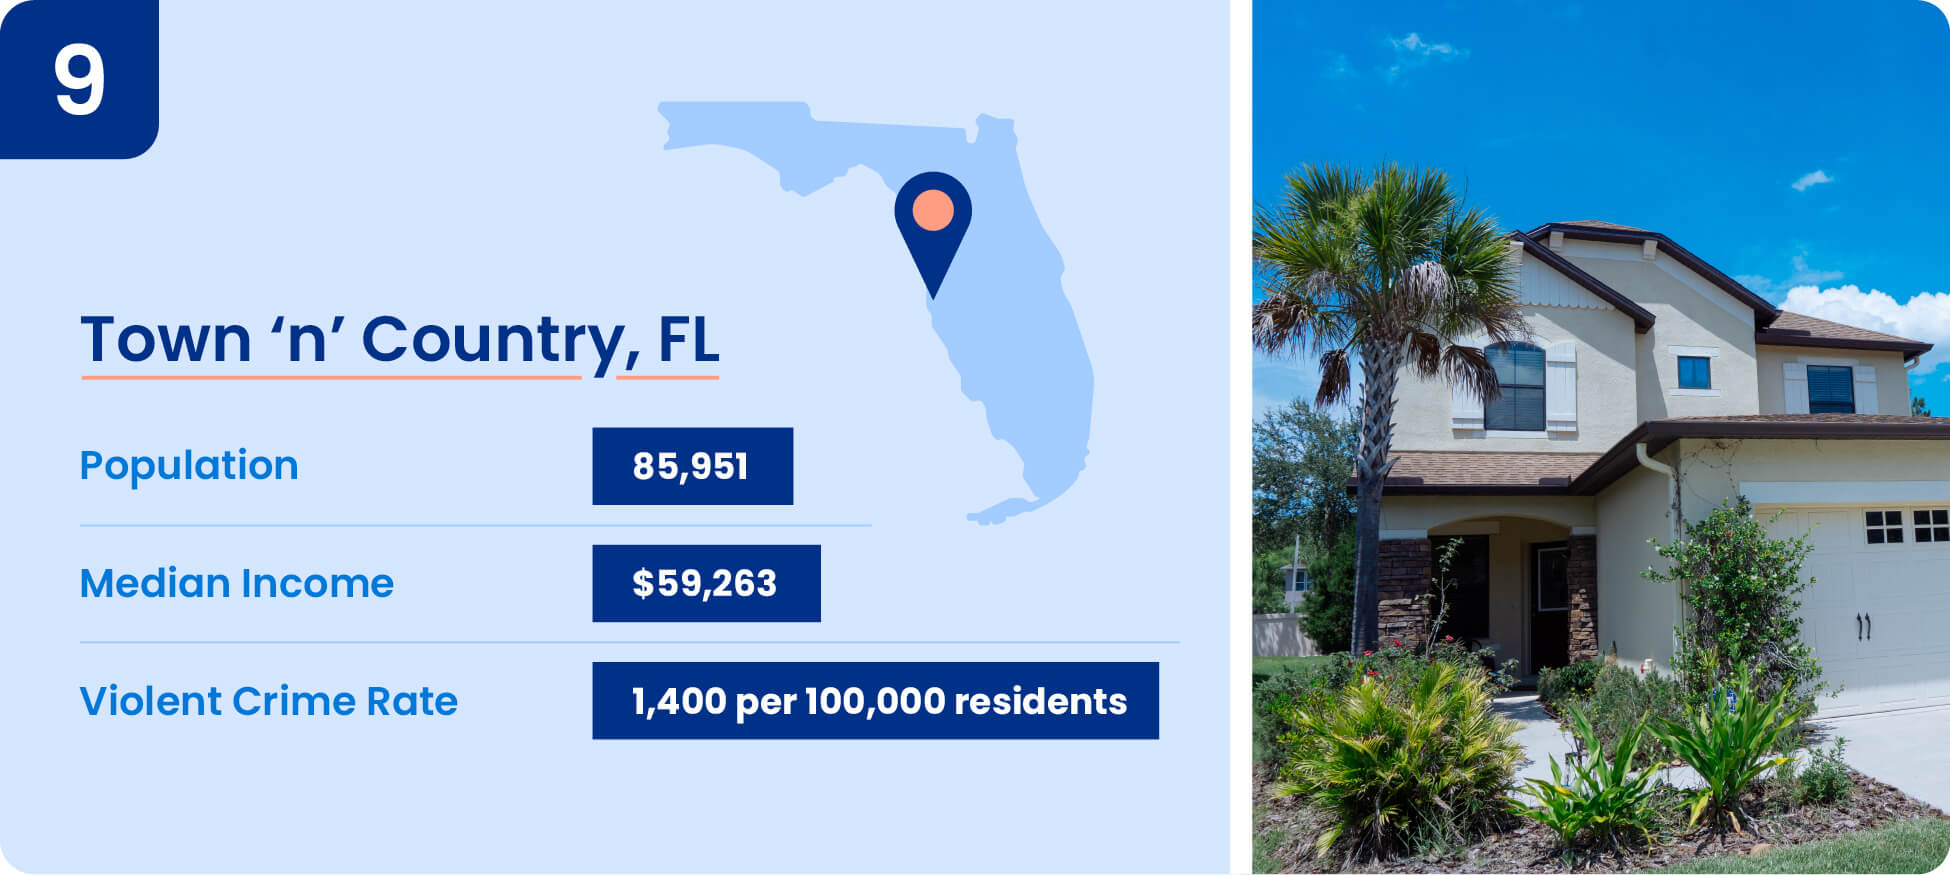 Image shows safety data including median income, population, and violent crime rate for Town 'N' Country, Florida.